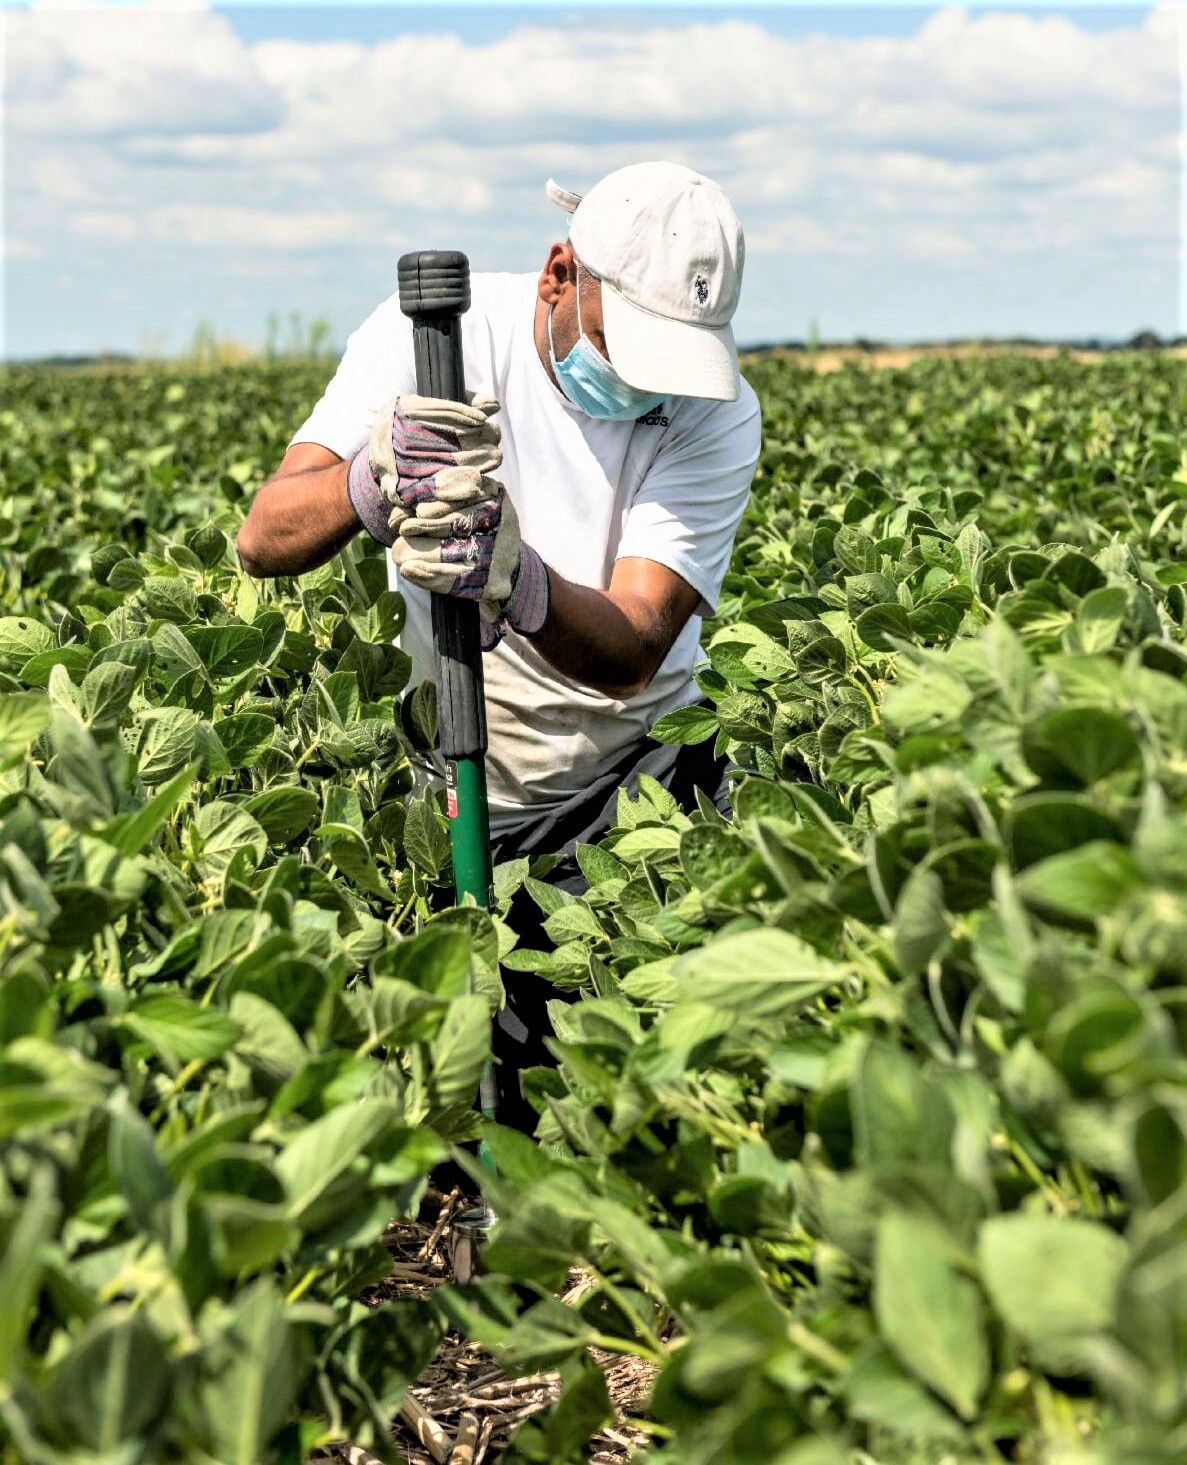 Associate professor Sandeep Kumar of SDSU’s Department of Agronomy, Horticulture and Plant Science takes samples at the Southeast Research Farm near Beresford, South Dakota, to determine the impact a three-crop rotation plan has on soil health. 